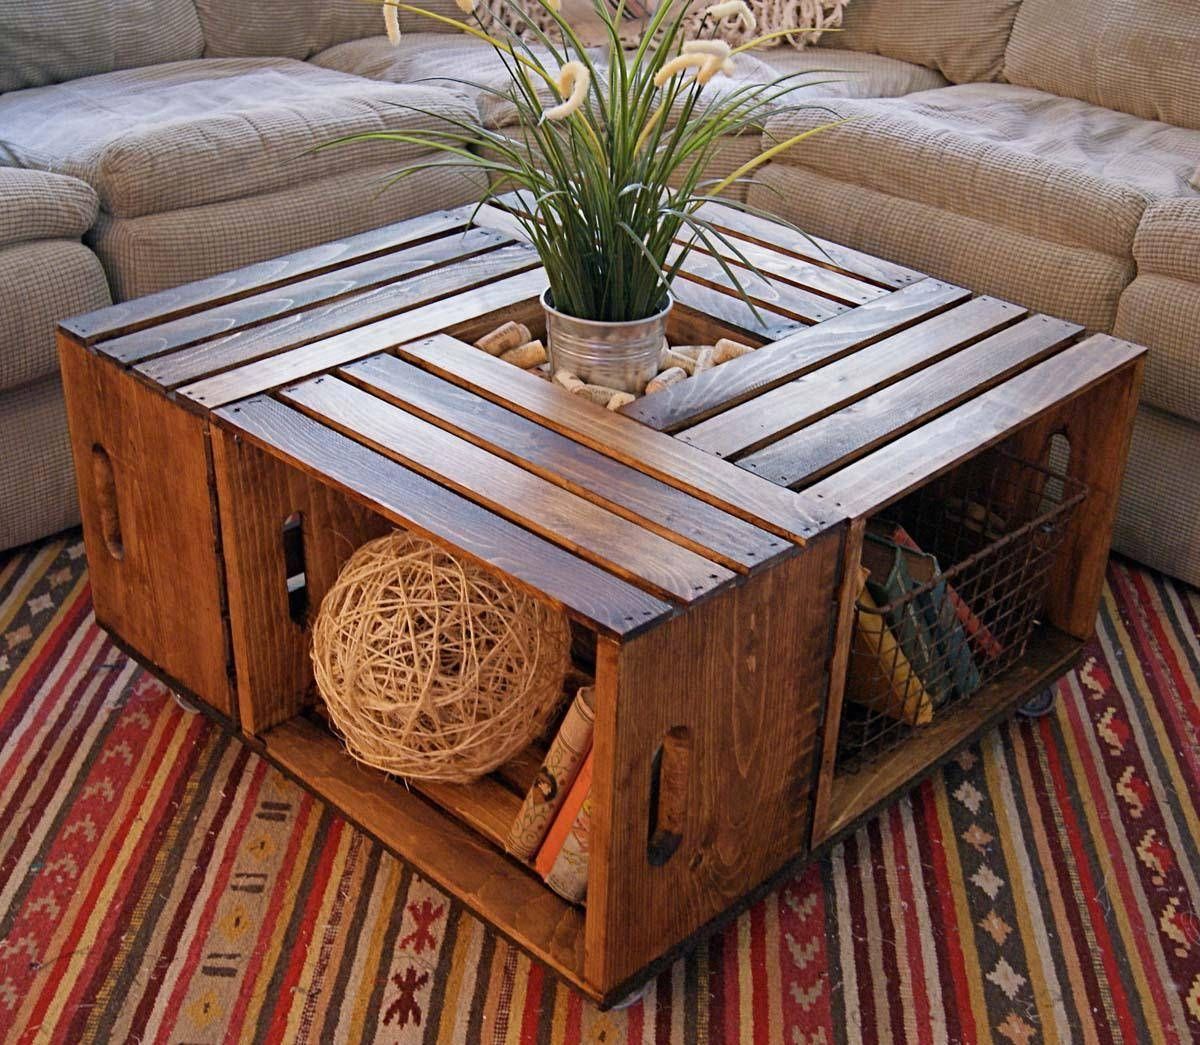 Large Wooden Coffee Table Perfect Square Coffee Table For Foosball Within Large Square Wood Coffee Tables (View 6 of 30)